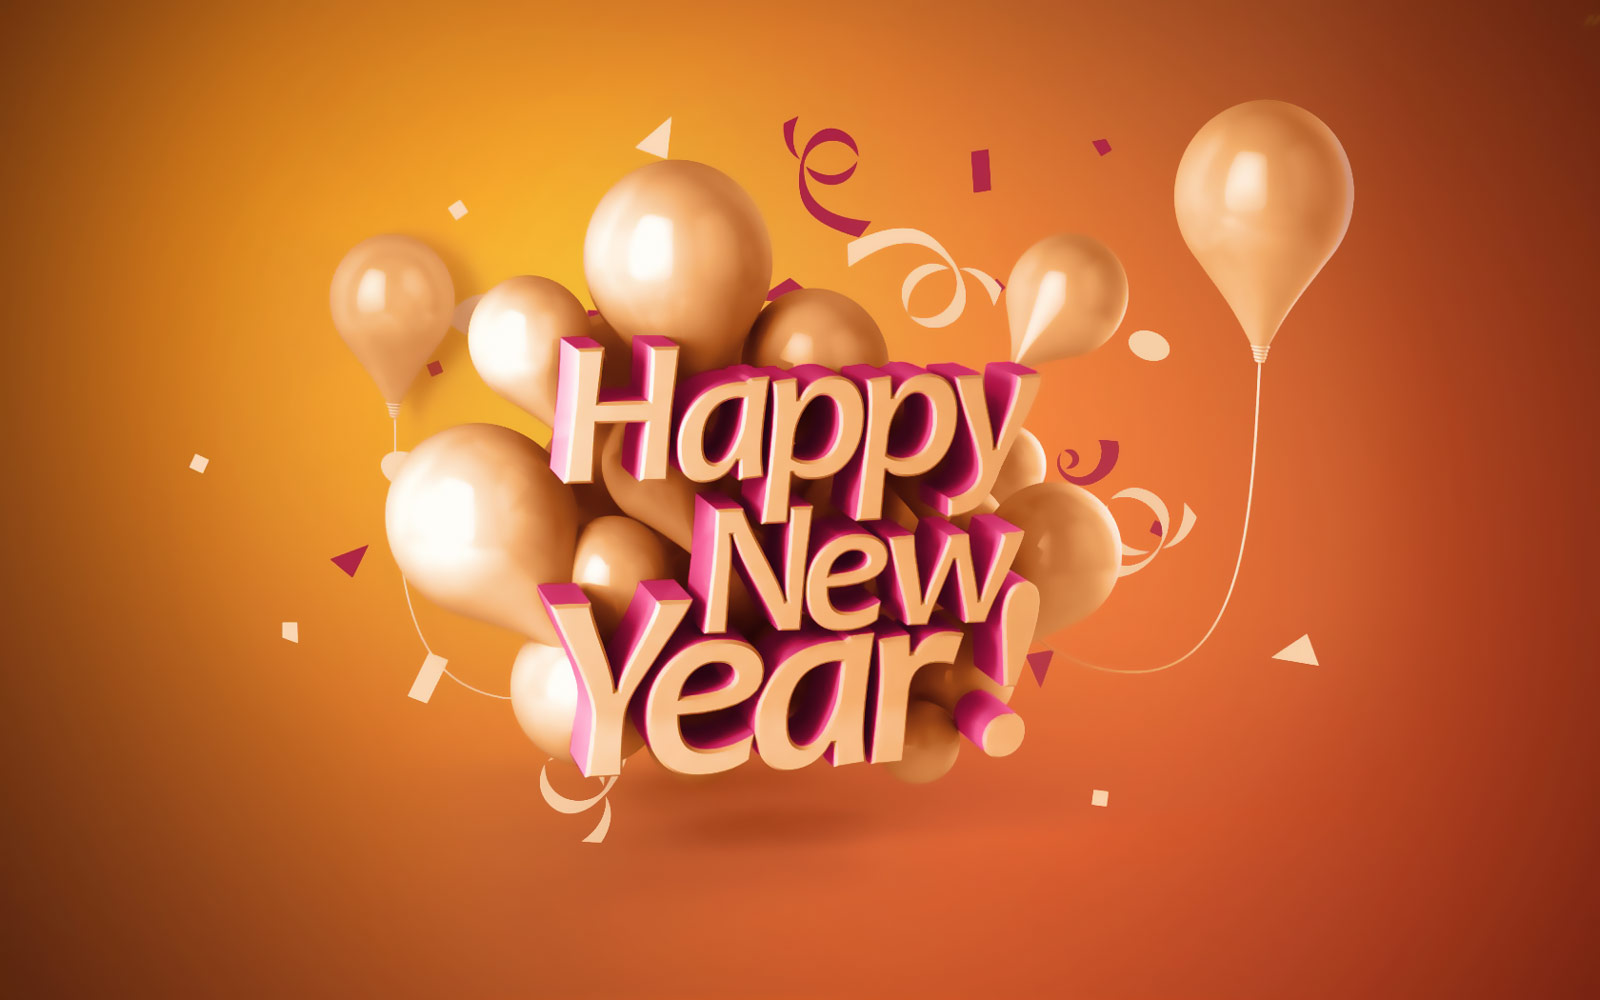 Happy New Year iPhone Live Wallpaper. | Happy new year wallpaper, Happy new  year pictures, New year images